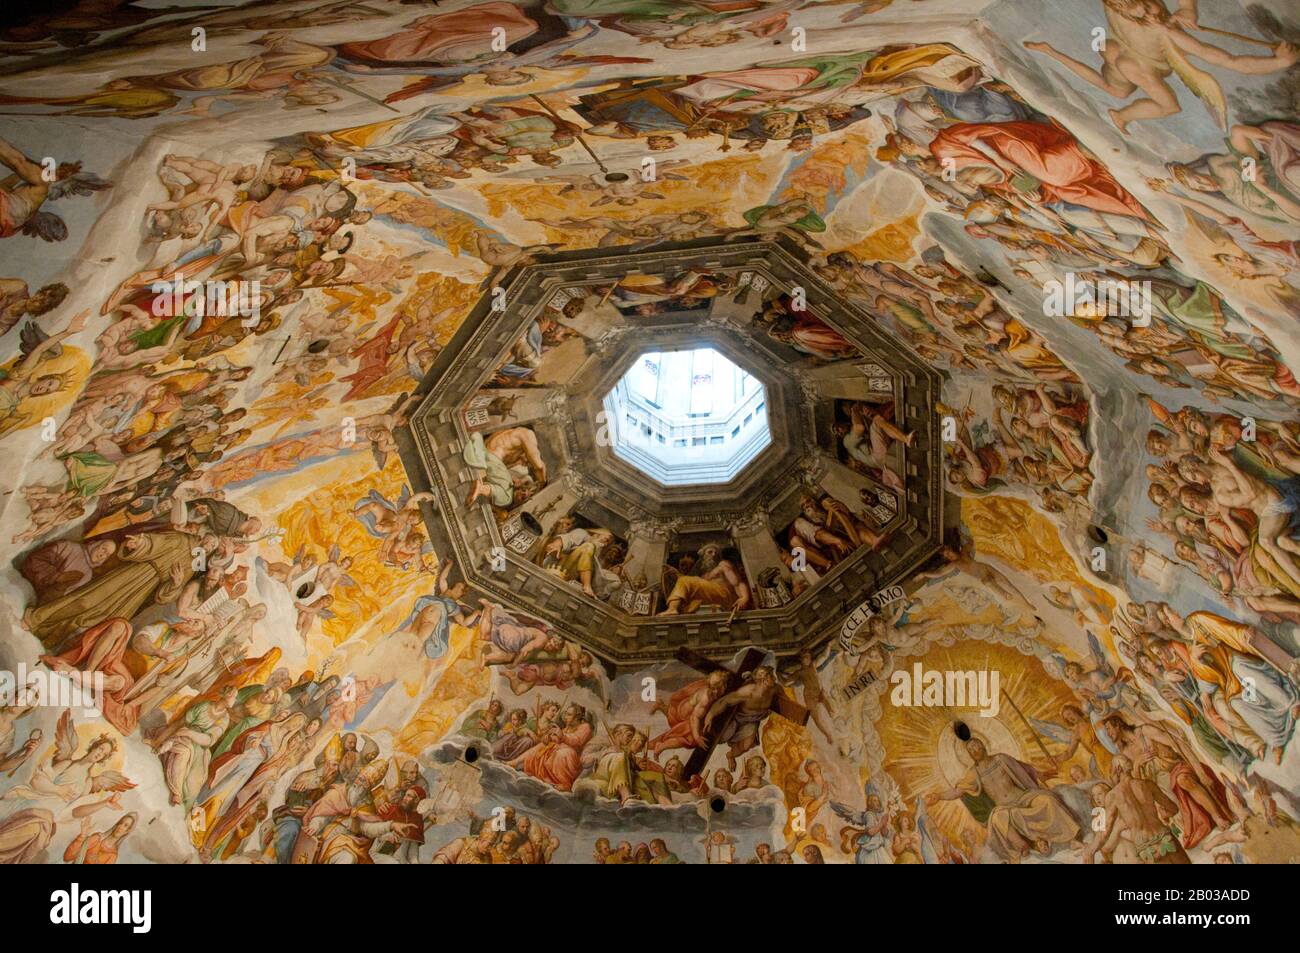 The interior frescoes of the dome were begun by Giorgio Vasari (1511 - 1574) and completed by Federico Zuccari (1540 - 1609). Stock Photo